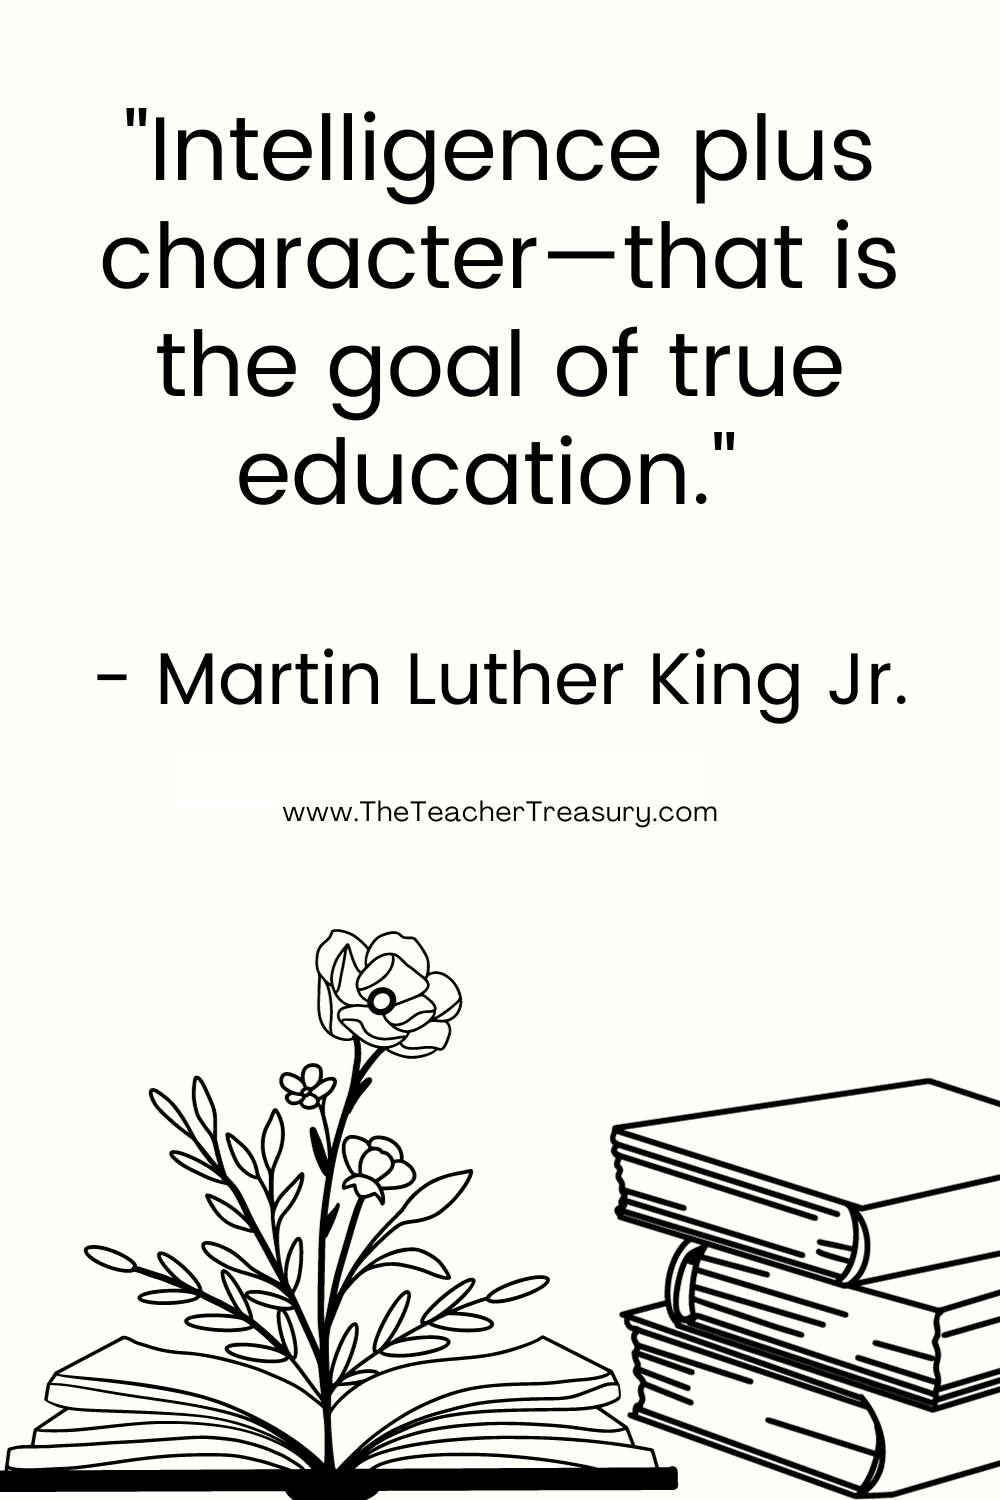 Intelligence plus character--that is the goal of true education. Martin Luther King Jr. 